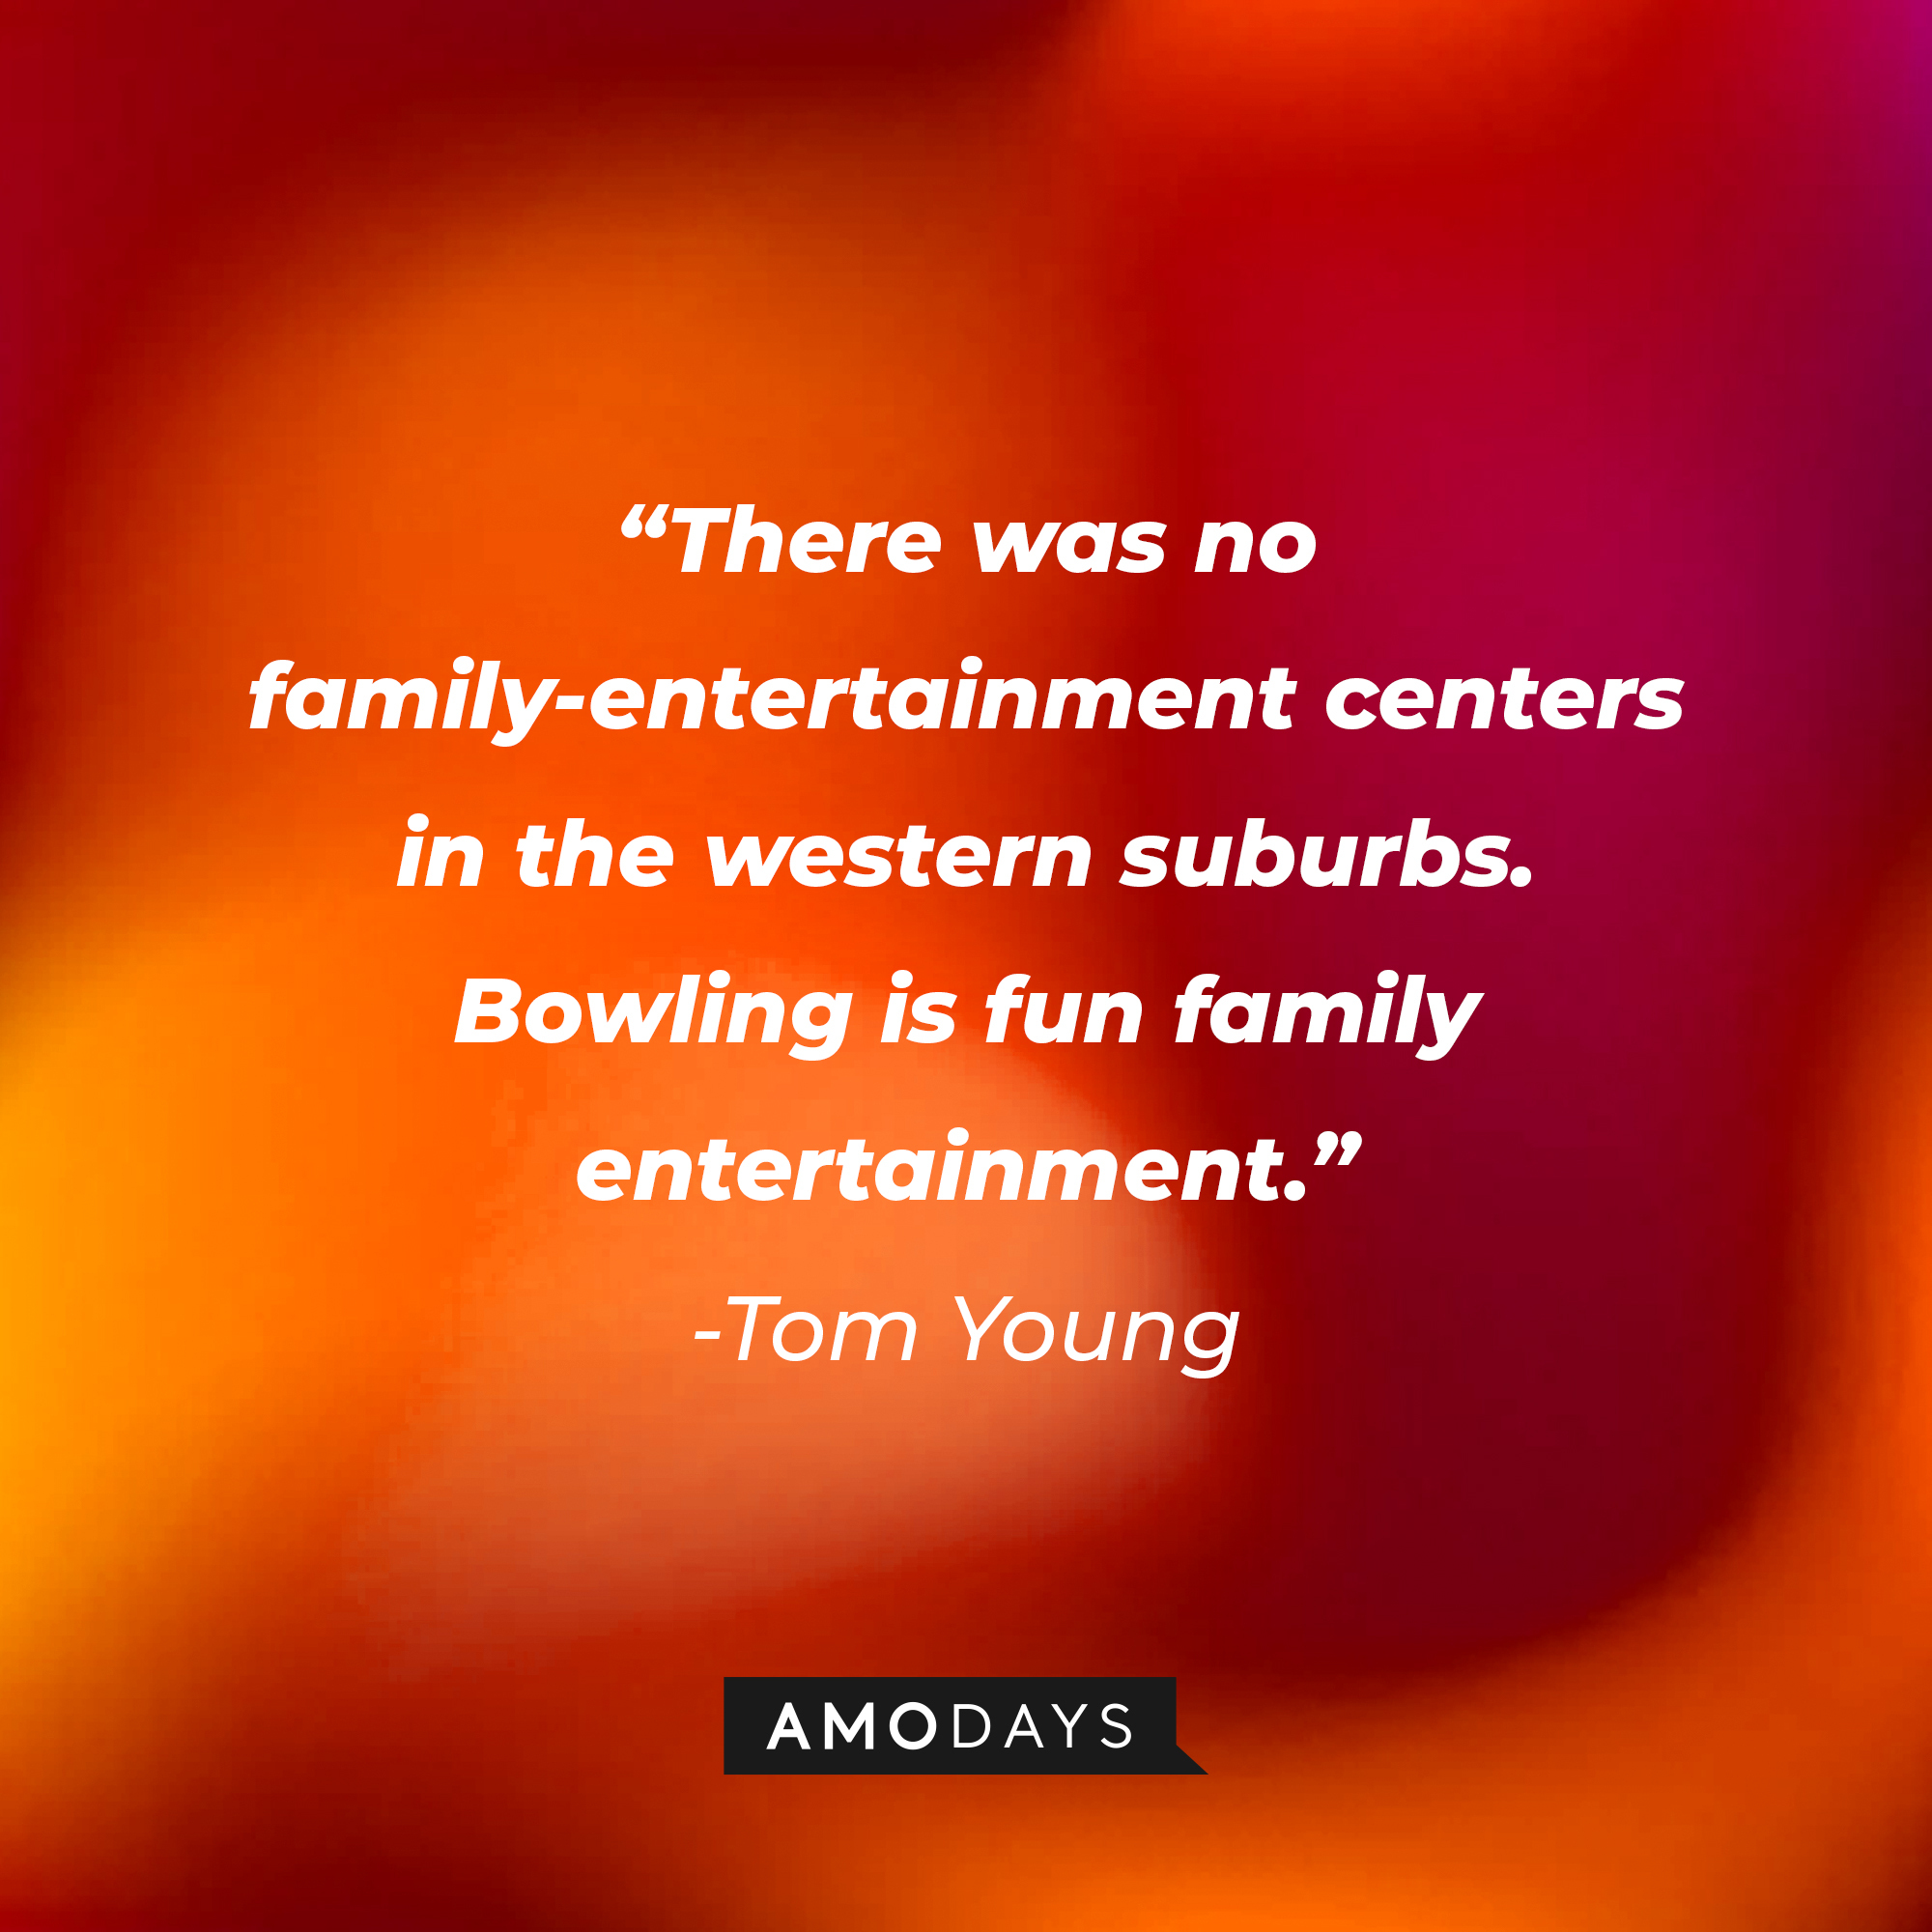 Tom Young's quote: "There was no family-entertainment centers in the western suburbs. Bowling is fun family entertainment." | Image: AmoDays